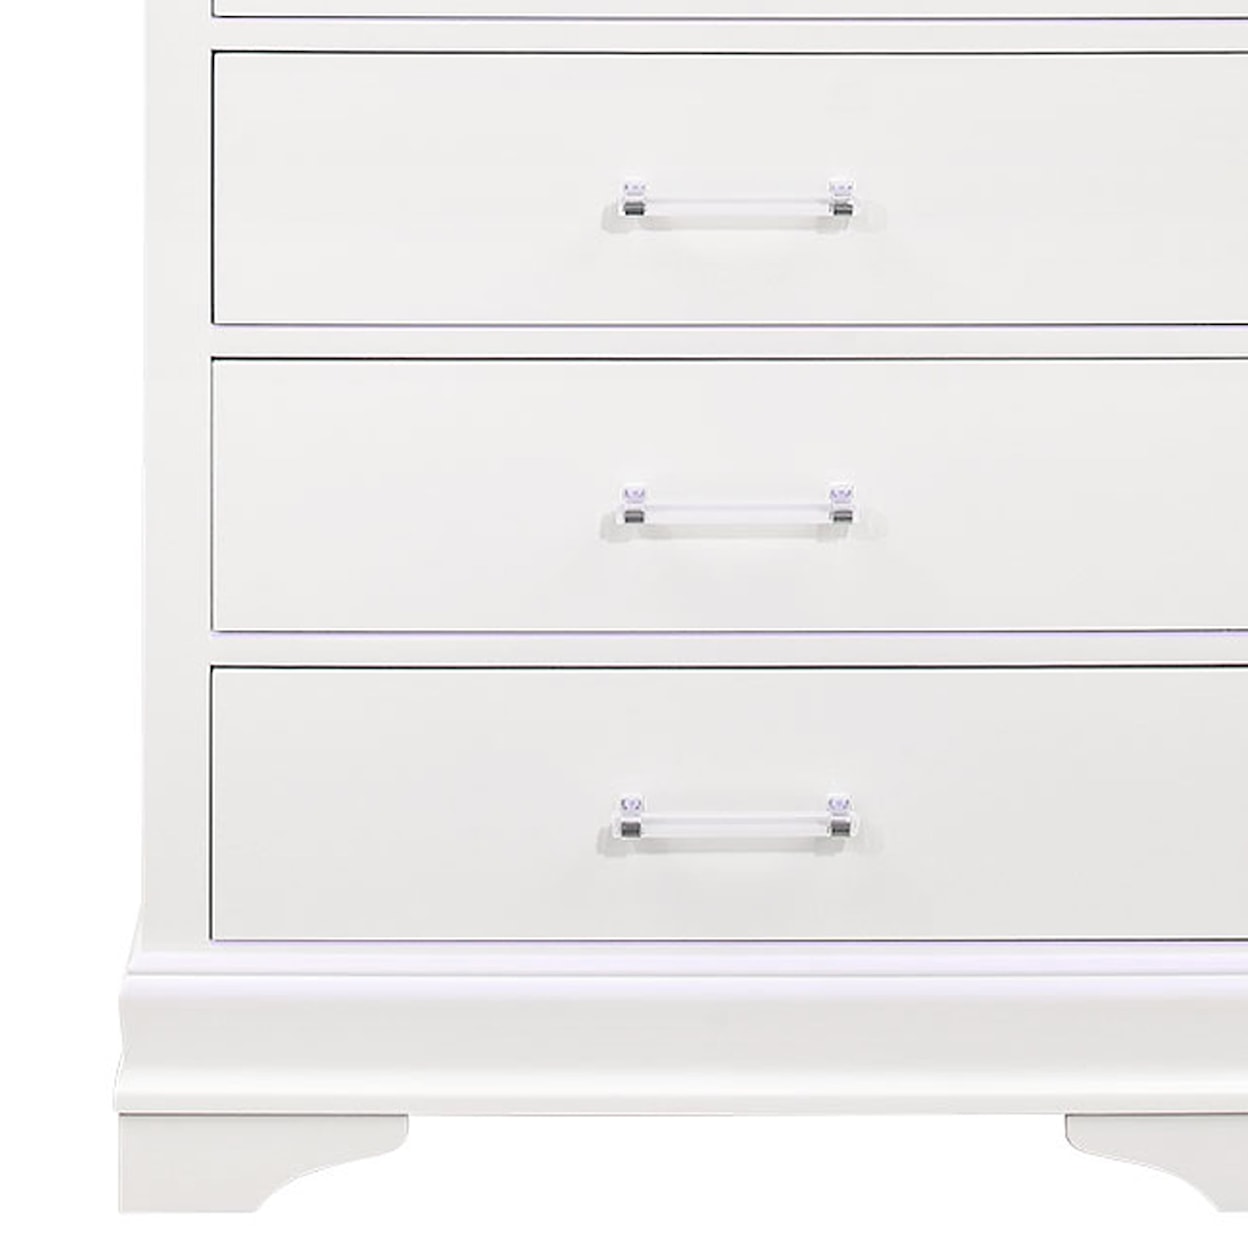 Global Furniture Light Up Louie LIGHT UP LOUIE WHITE CHEST |